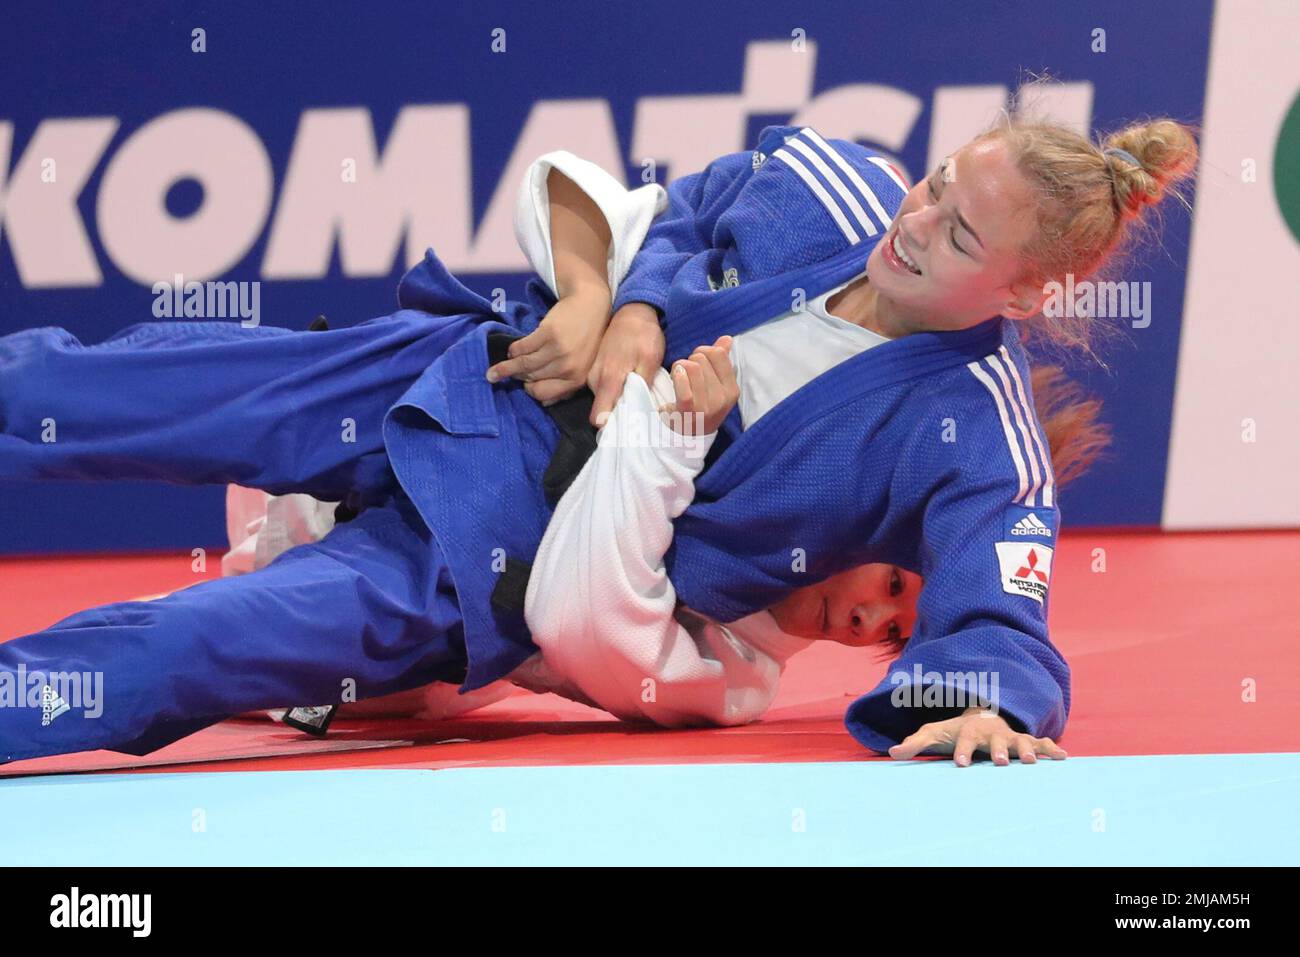 Funa Tonaki of Japan, rear, competes against Daria Bilodid of Ukraine during a womens -48 kilogram final of the World Judo Championships in Tokyo, Sunday, Aug